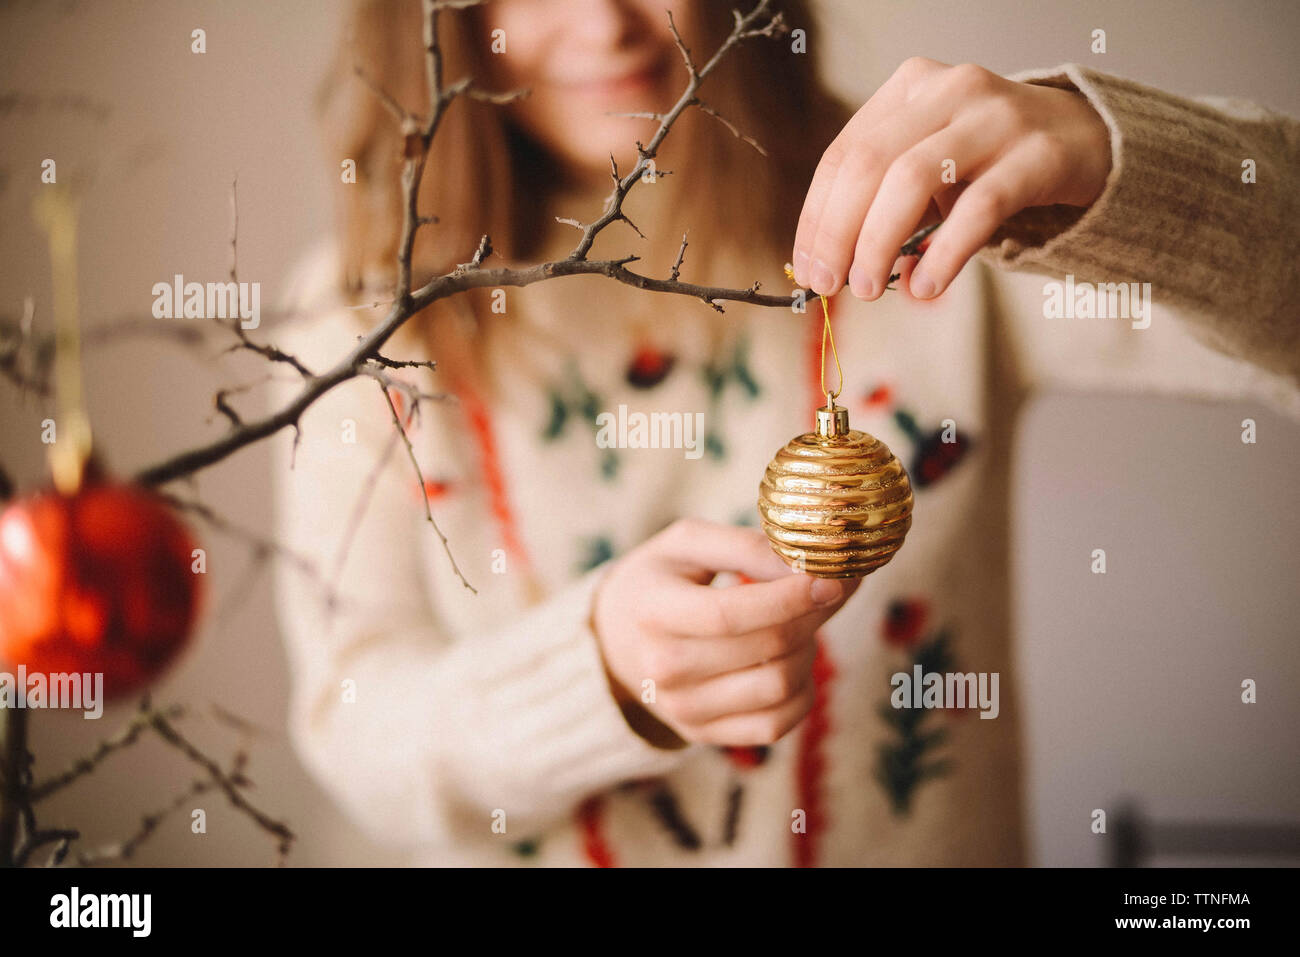 Midsection of woman hanging bauble on twig during christmas at home Stock Photo